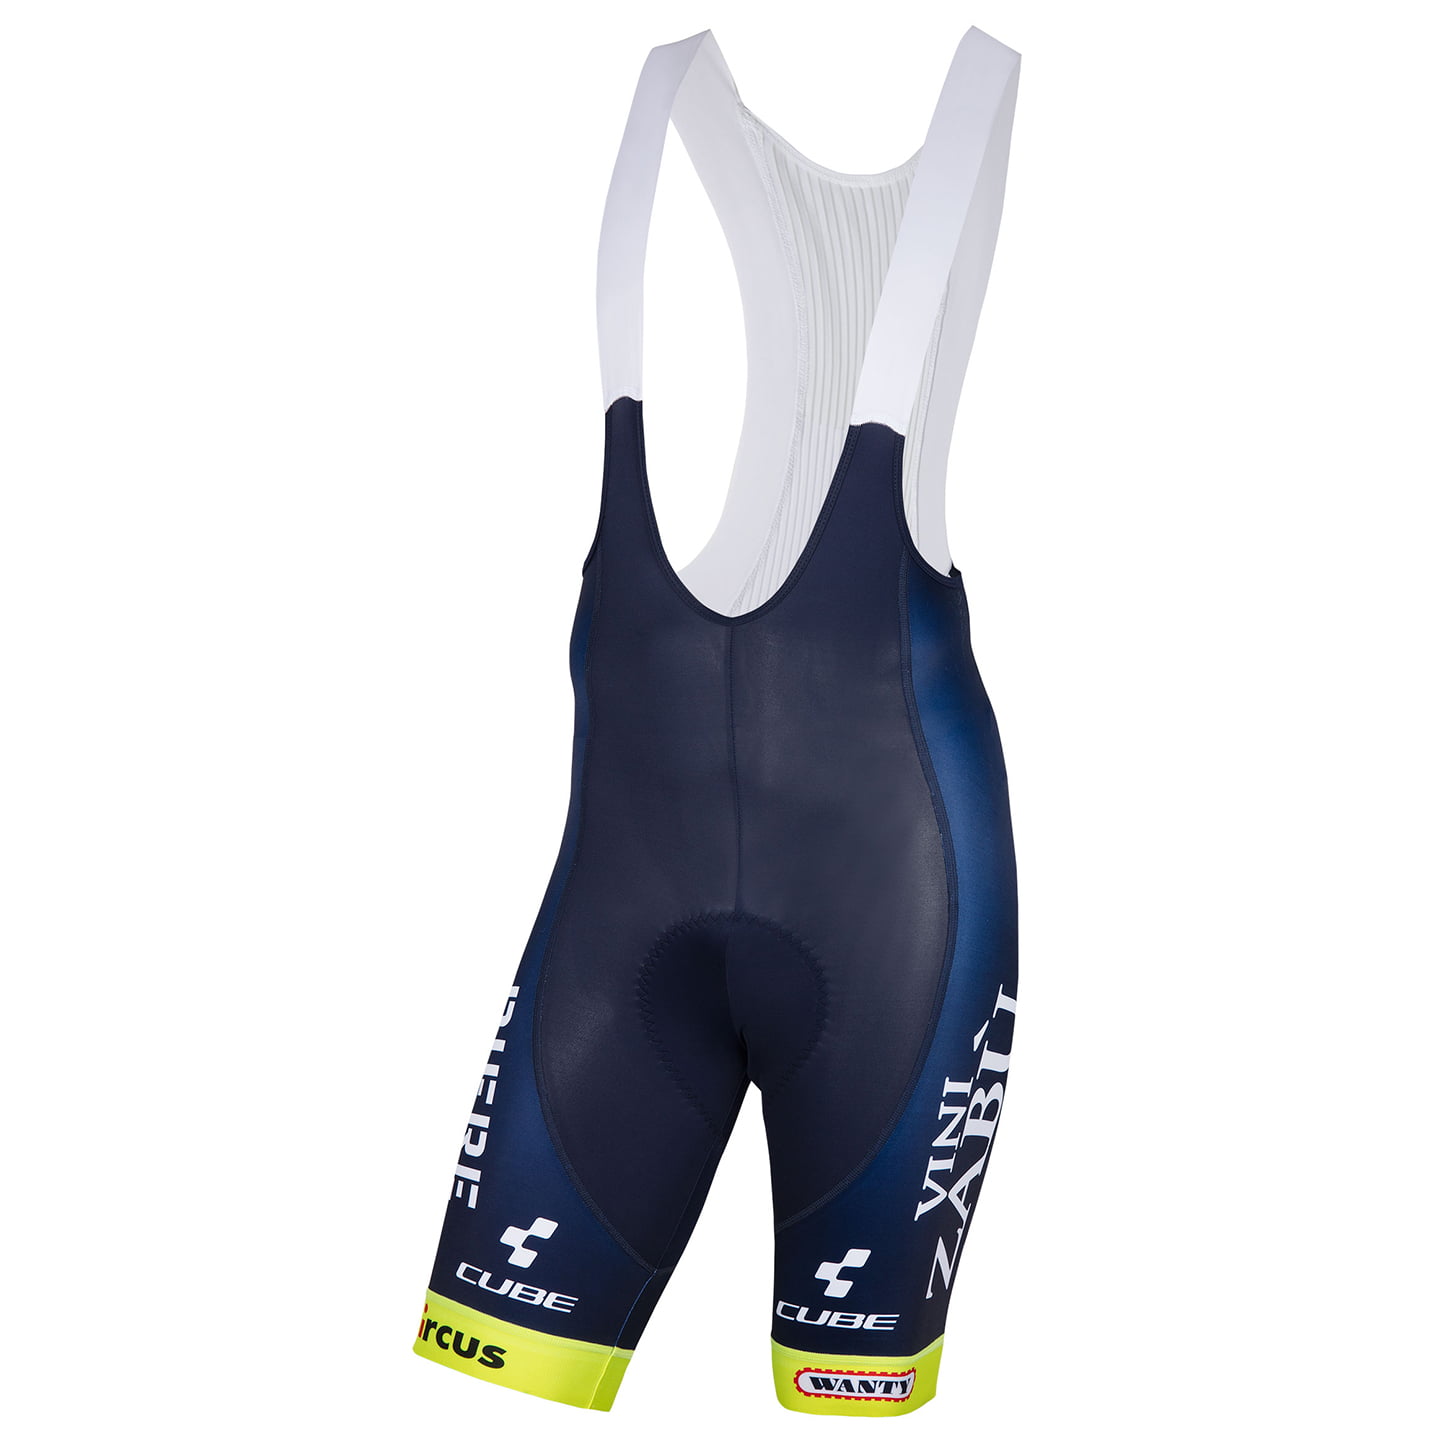 INTERMARCHE-CIRCUS-WANTY Race 2023 Bib Shorts, for men, size XL, Cycle trousers, Cycle clothing